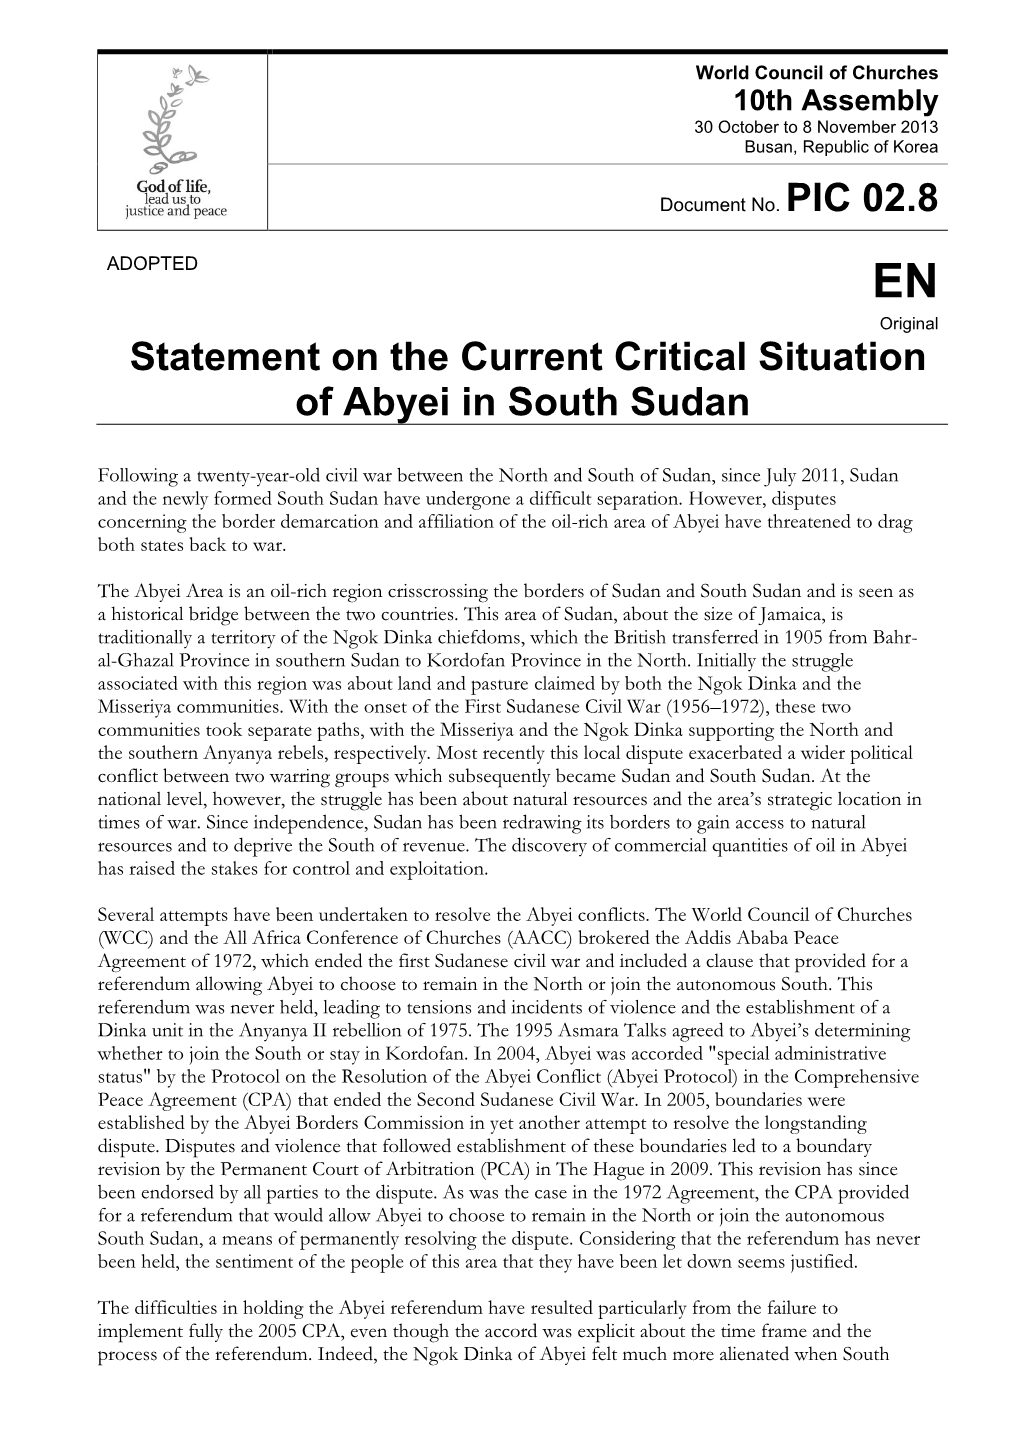 Statement on the Current Critical Situation of Abyei in South Sudan